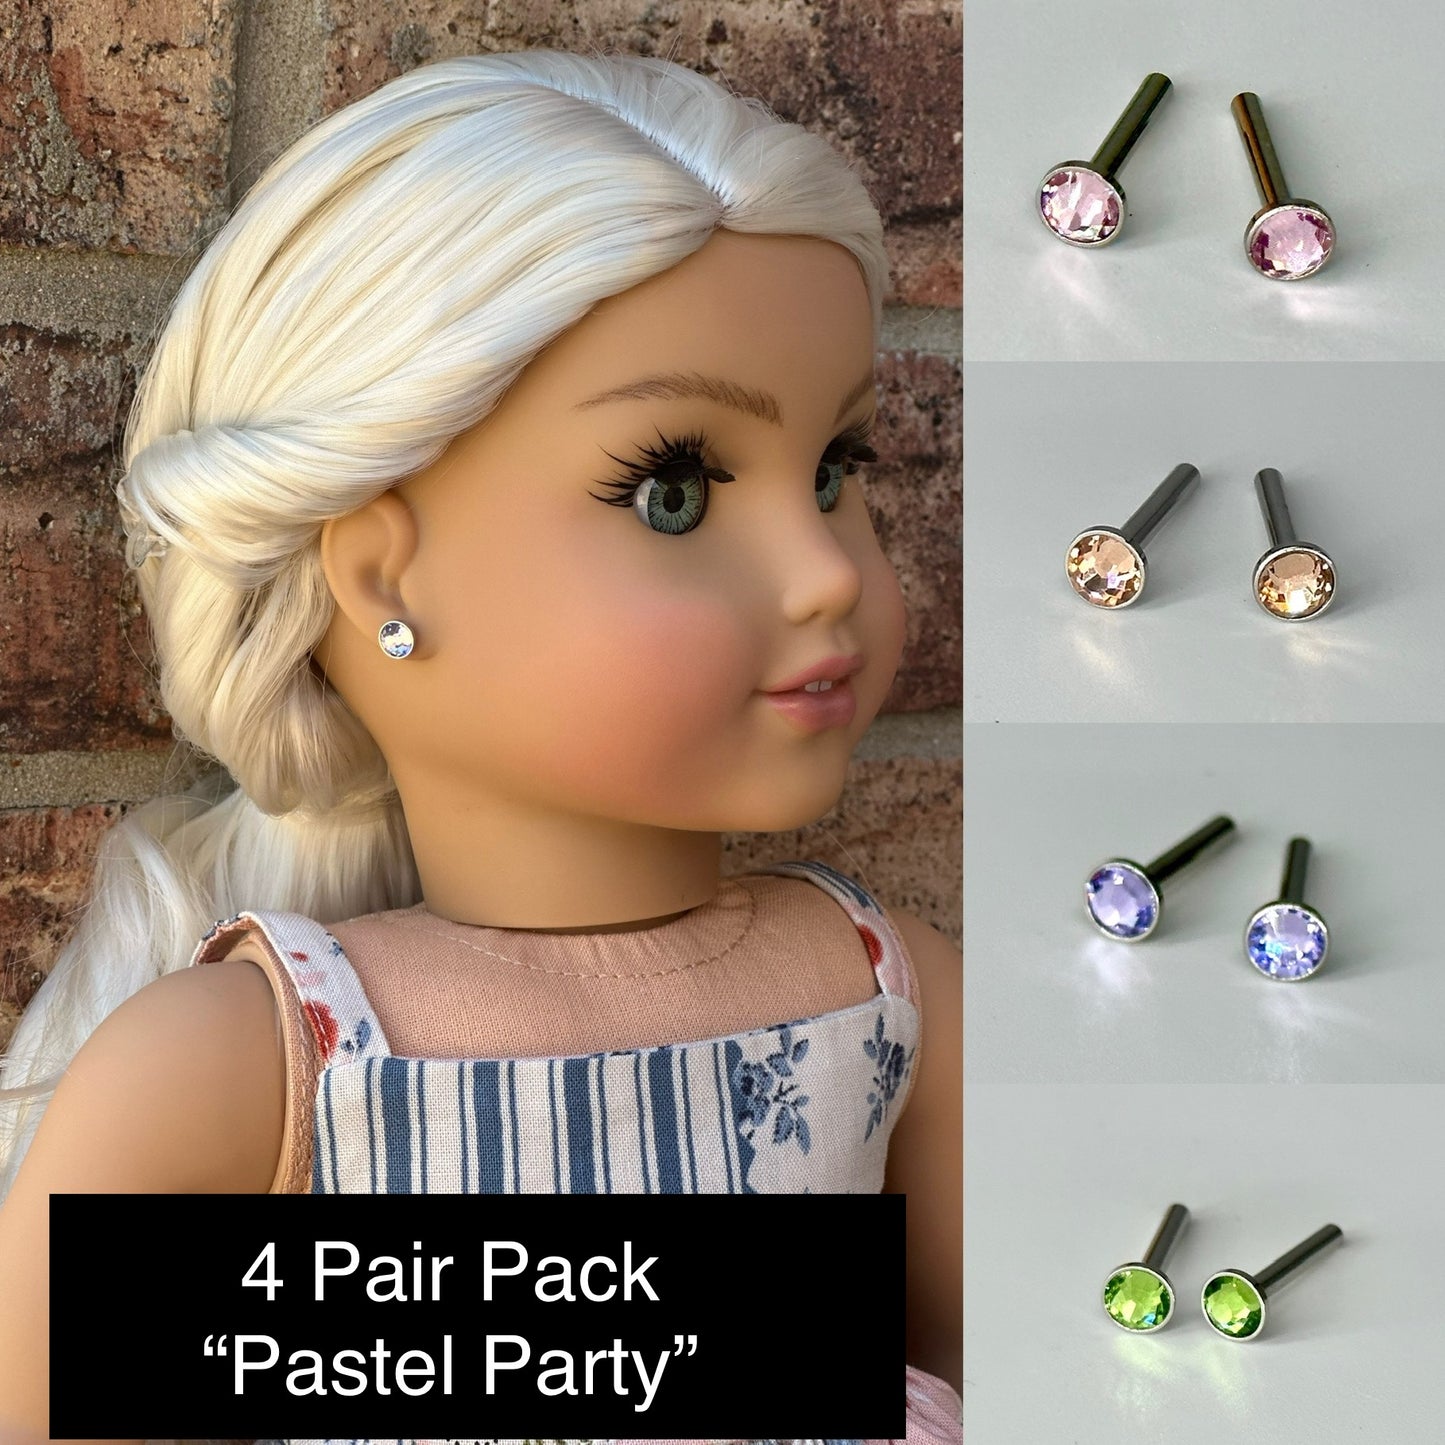 Glam Stone Gem Earrings for 18” Dolls 4 pair pack “Pastel Party”